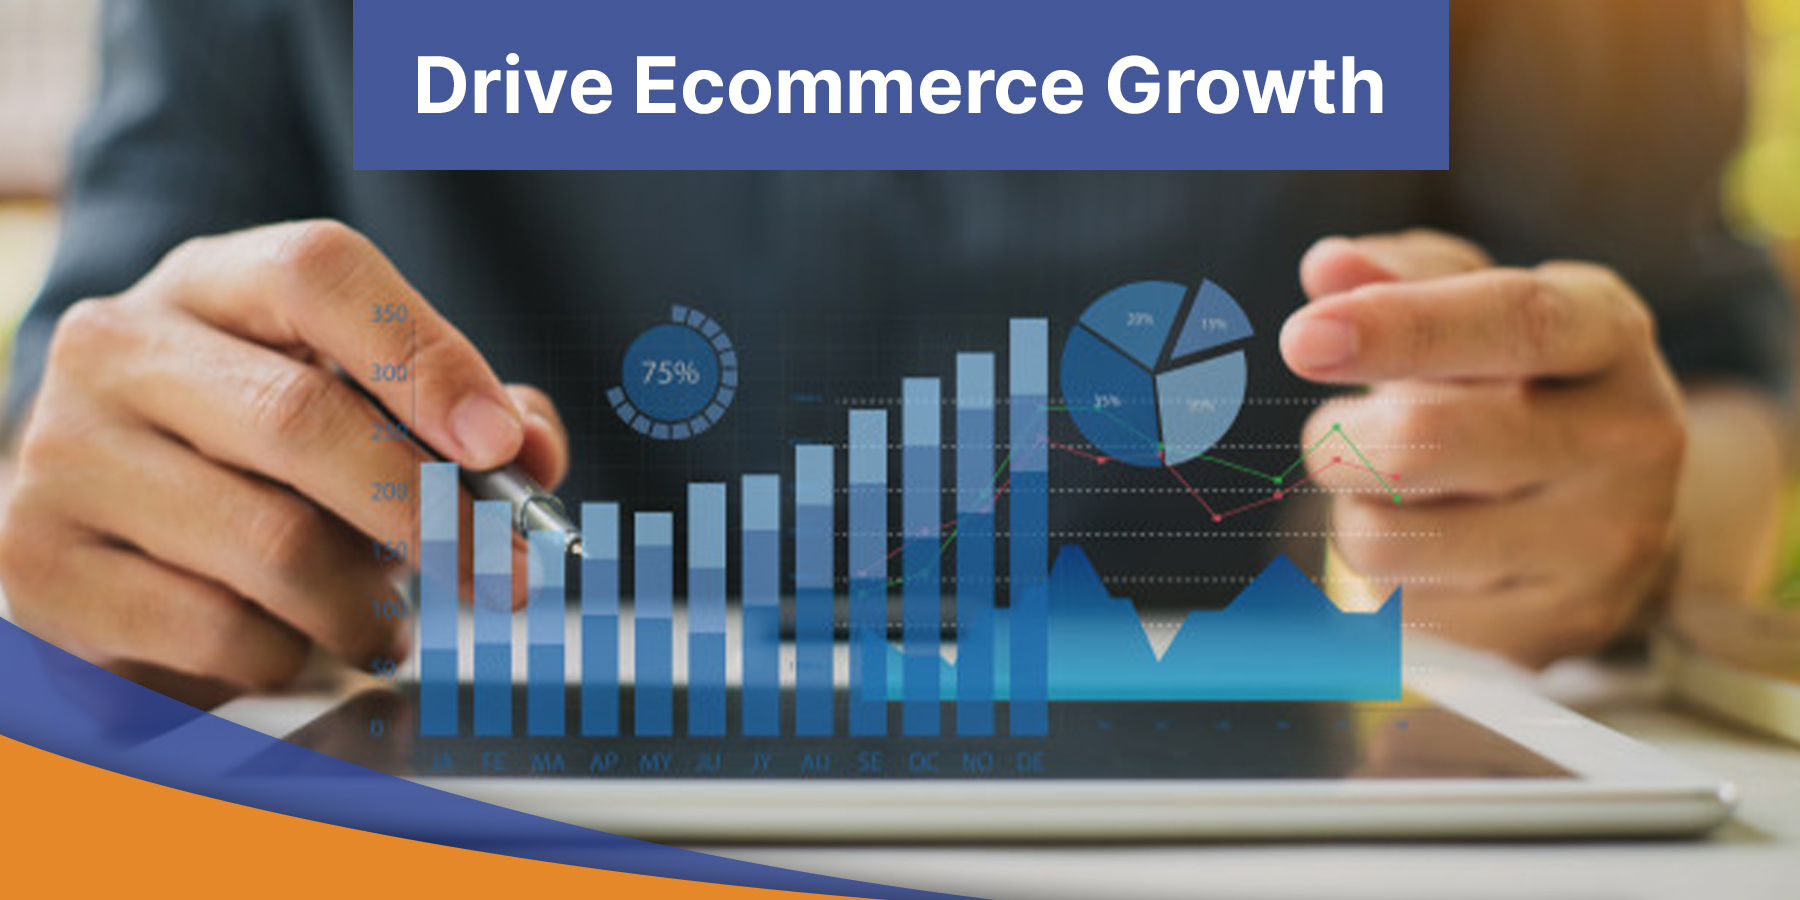 Drive Ecommerce Growth